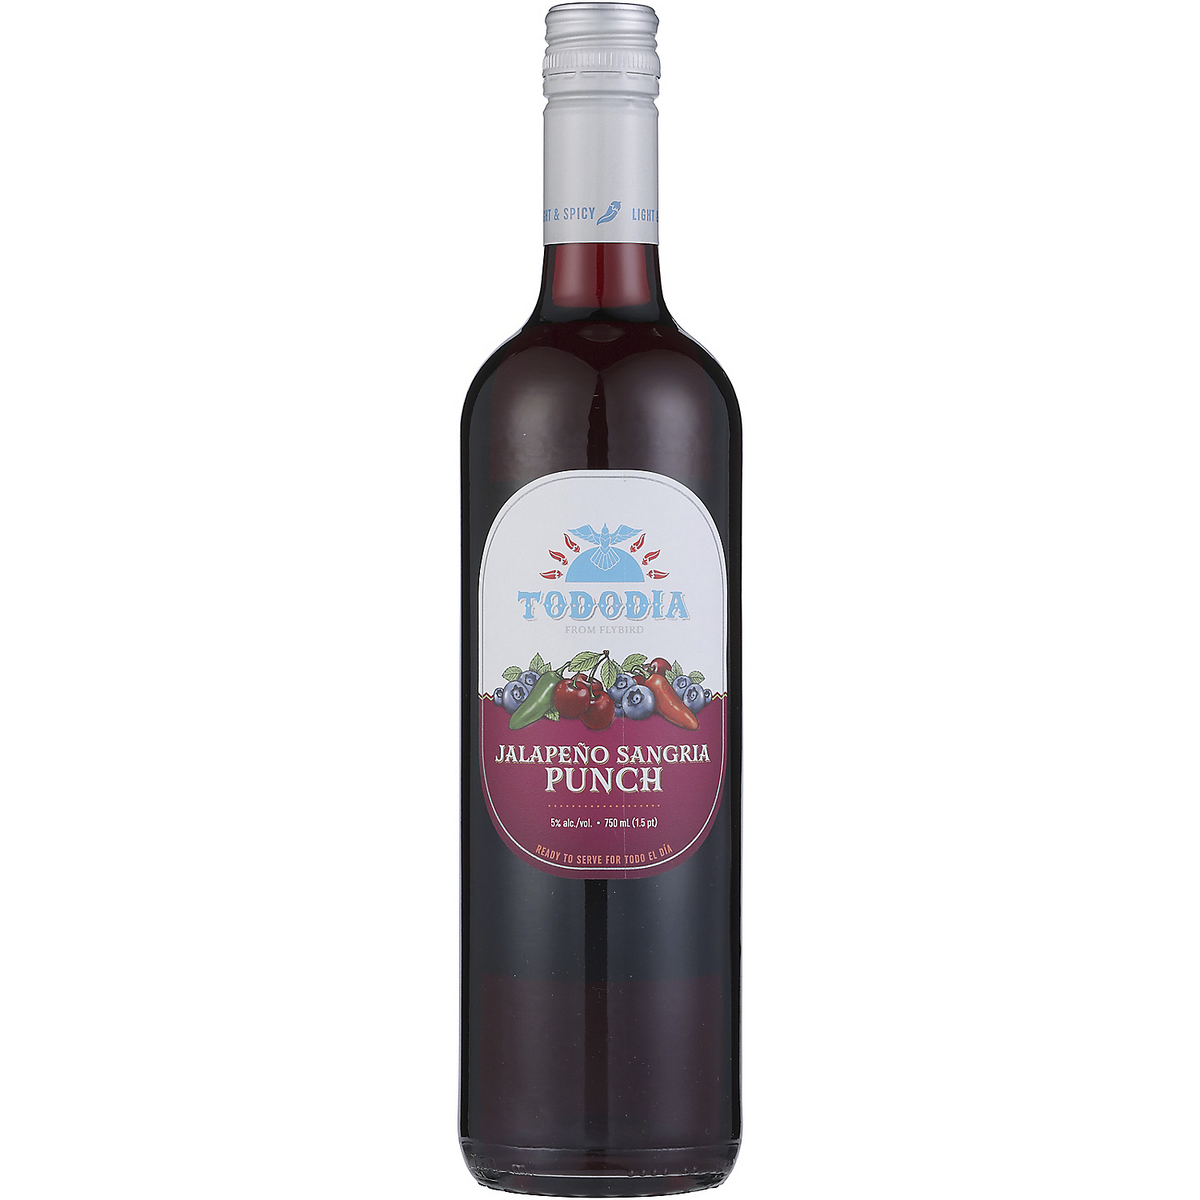 Tododia Jalapeno Sangria Punch Wine Based Cocktail 750Ml